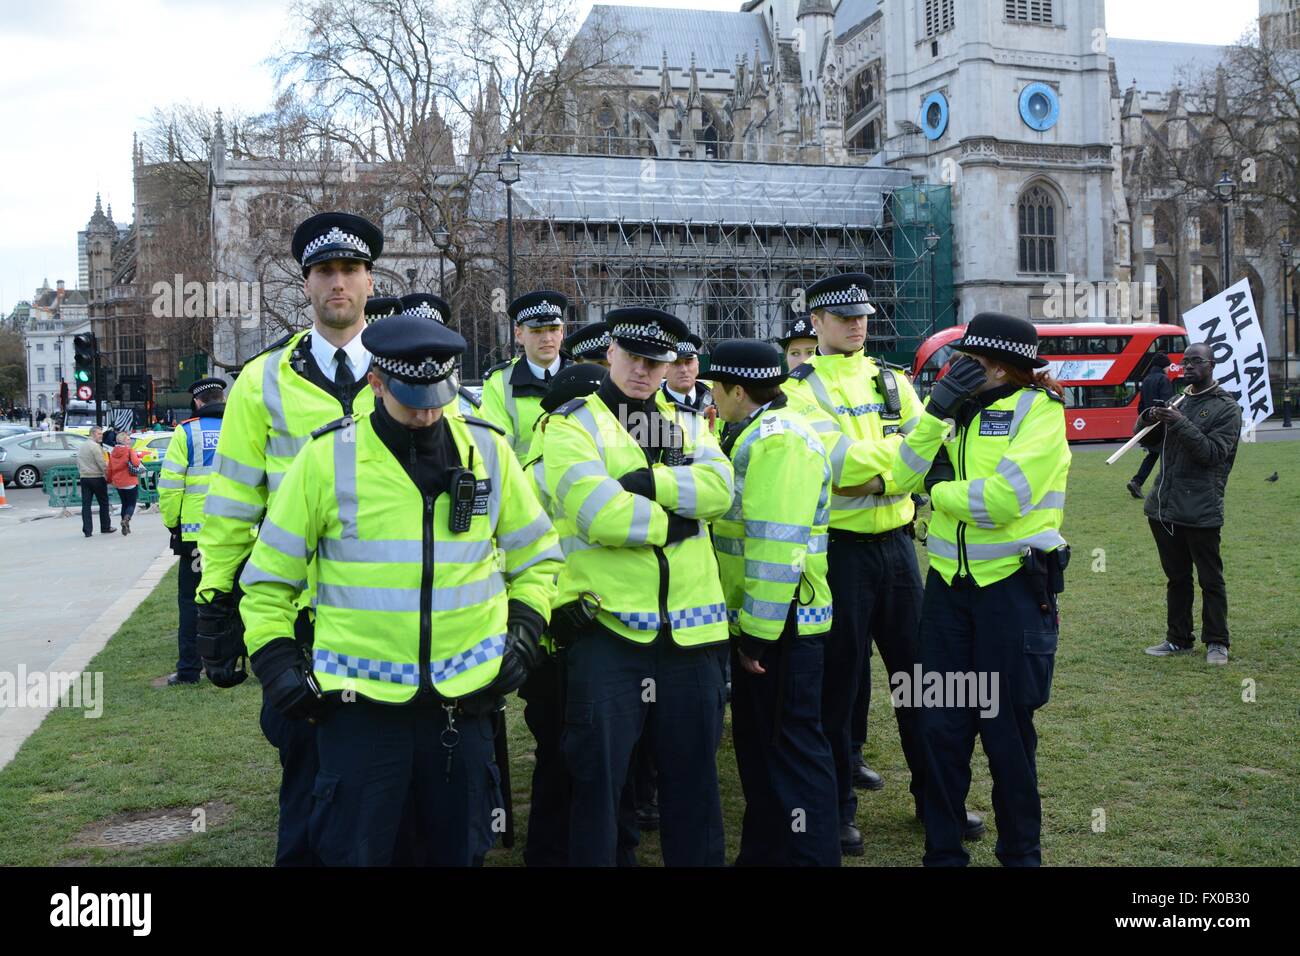 London, UK. 9th April 2016. Police gear up to move in on drunk crowd in Parliament Square.Police clash with protesters in Parliament Square, London. Credit:  Marc Ward/Alamy Live News Stock Photo